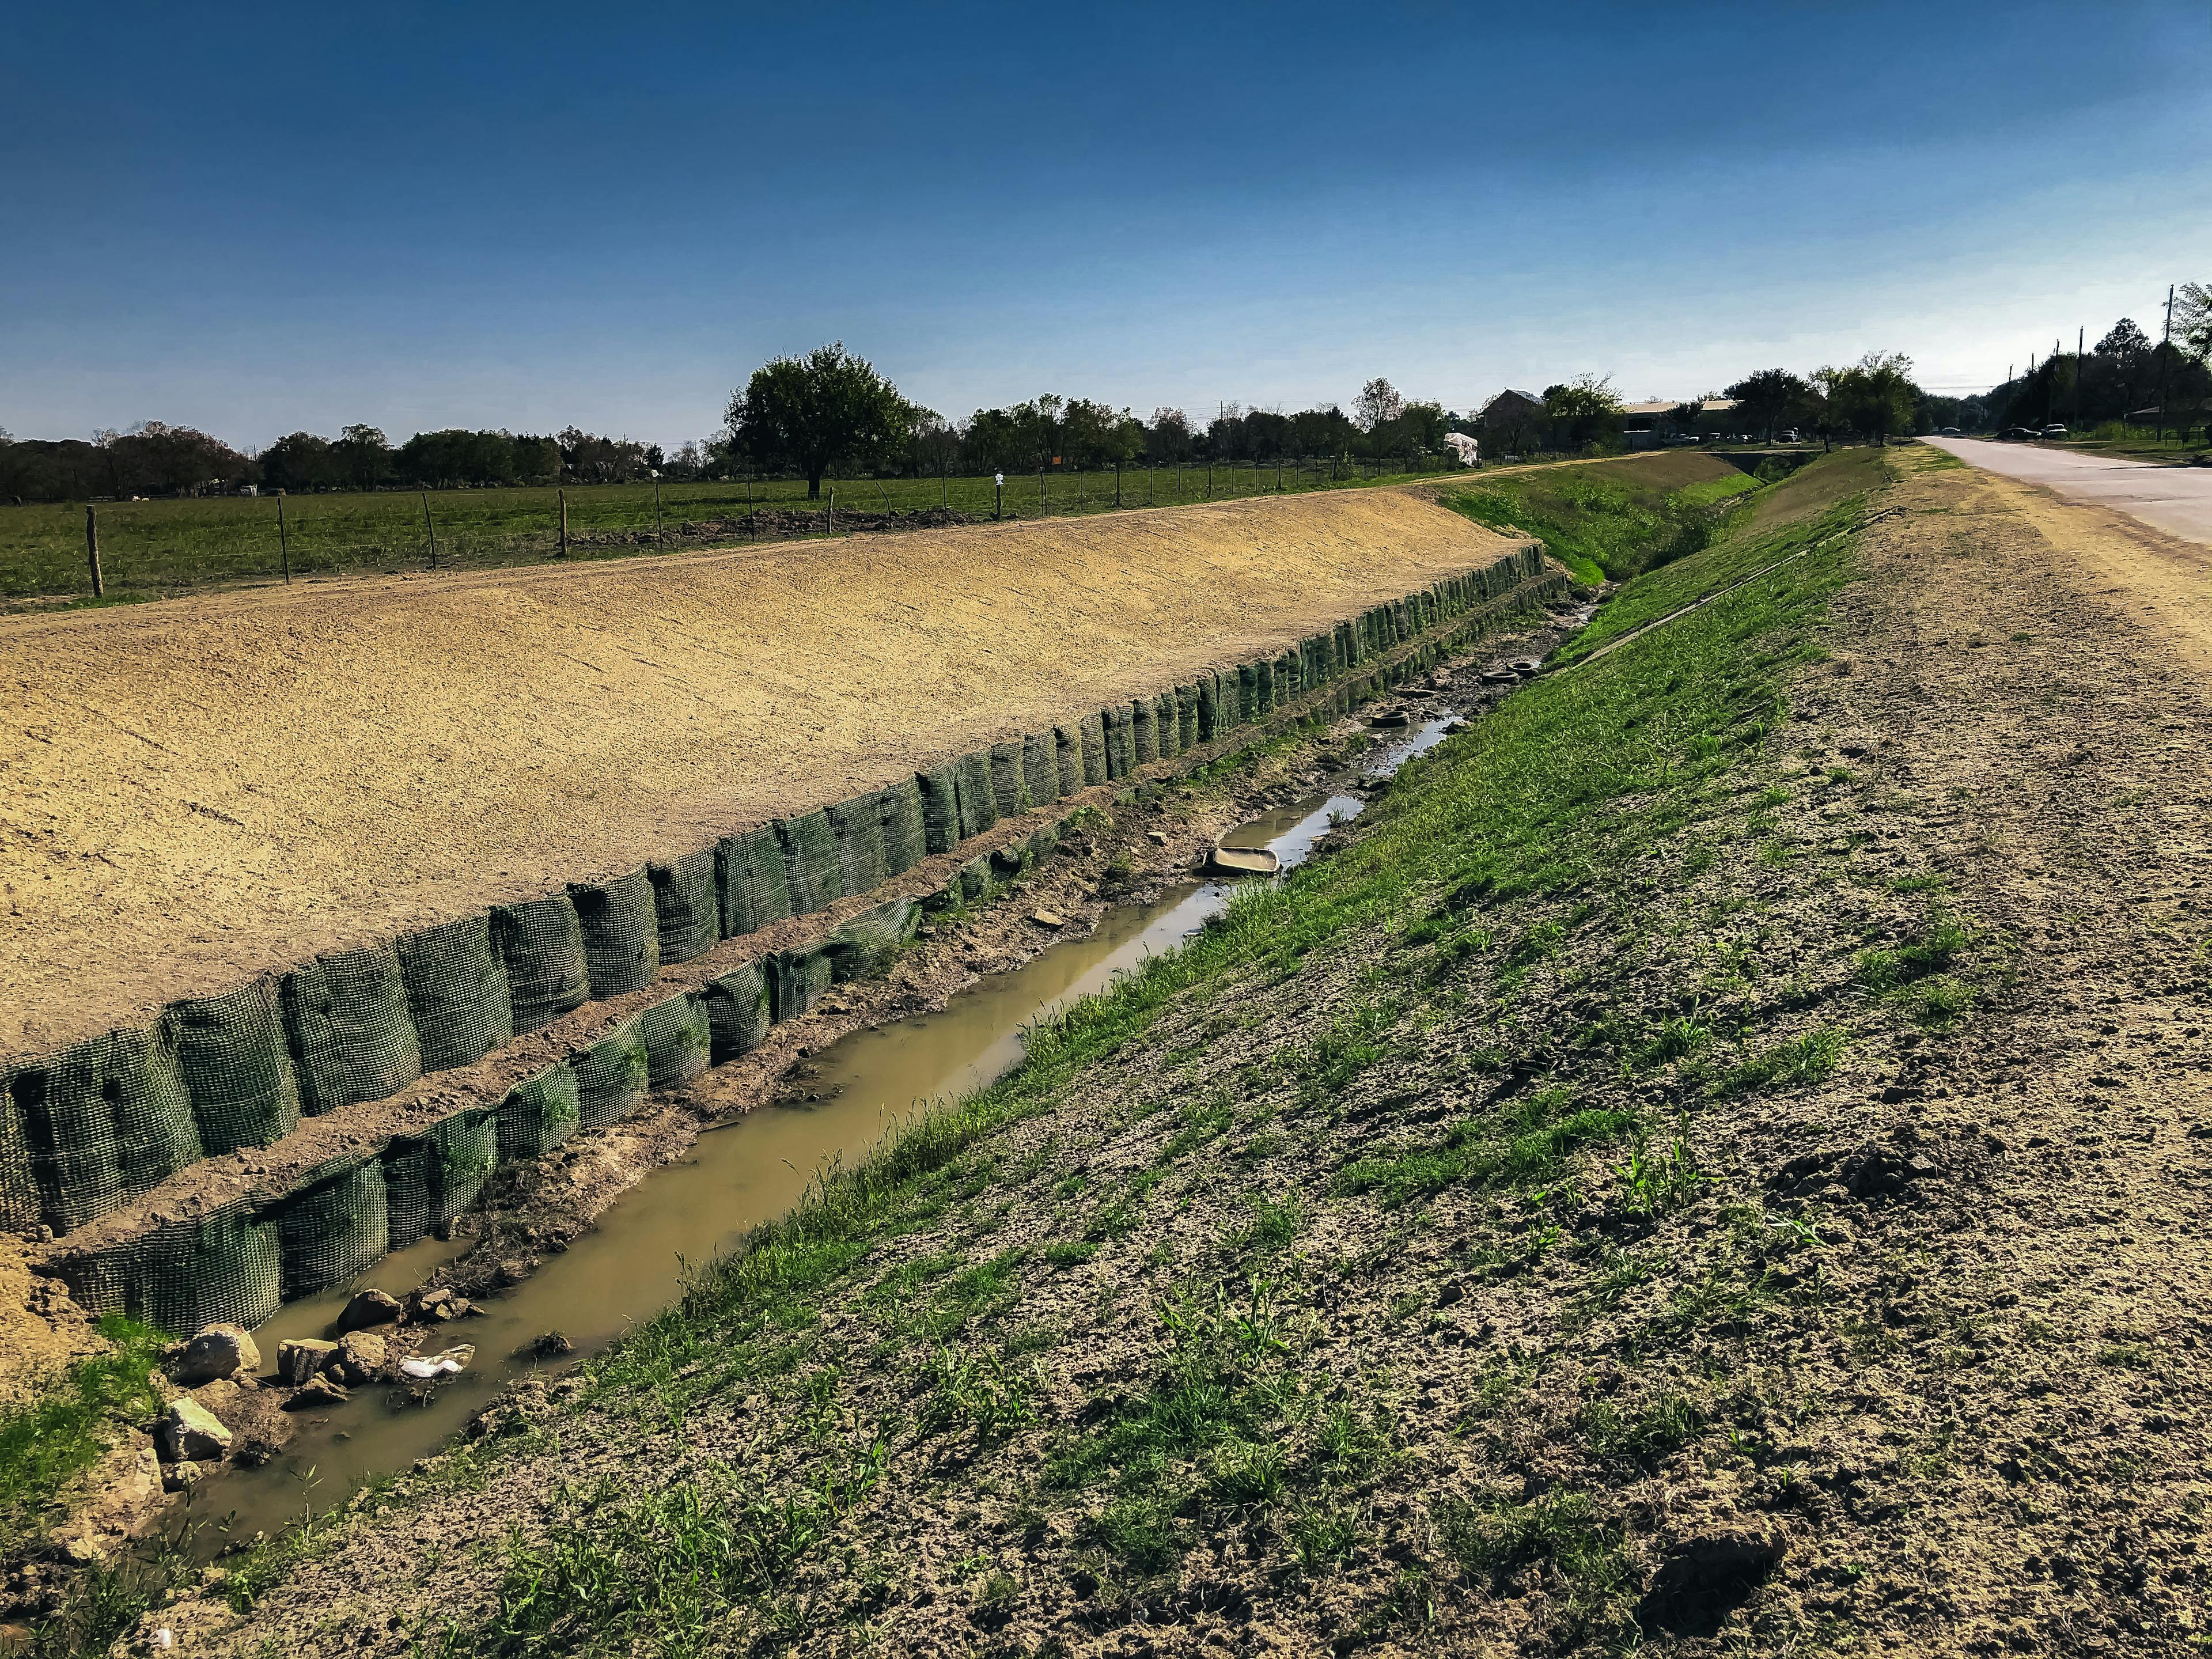 BKDD used PROPEX Scourlok for durable, environmentally-friendly erosion protection along a drainage channel in Texas, replacing gabion baskets with a long-lasting solution.